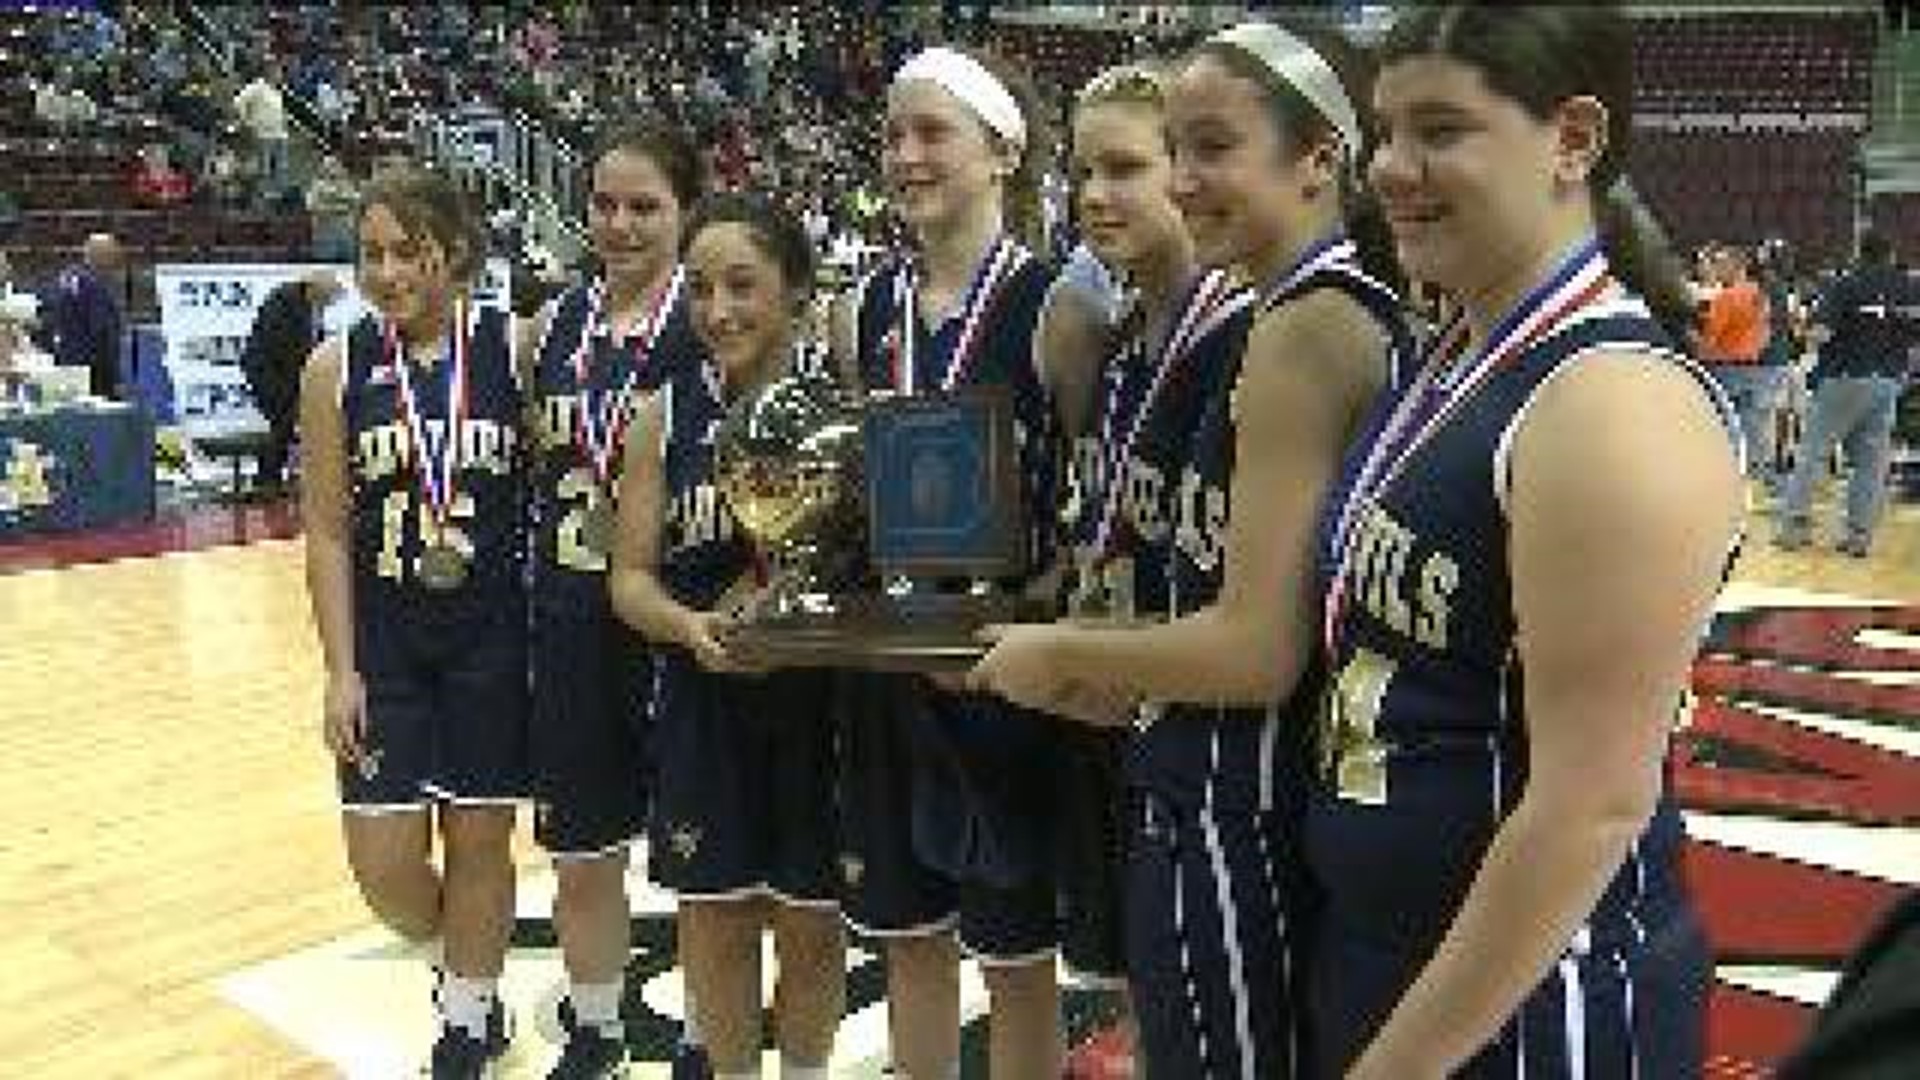 Old Forge Girls’ Fall Short of State Title